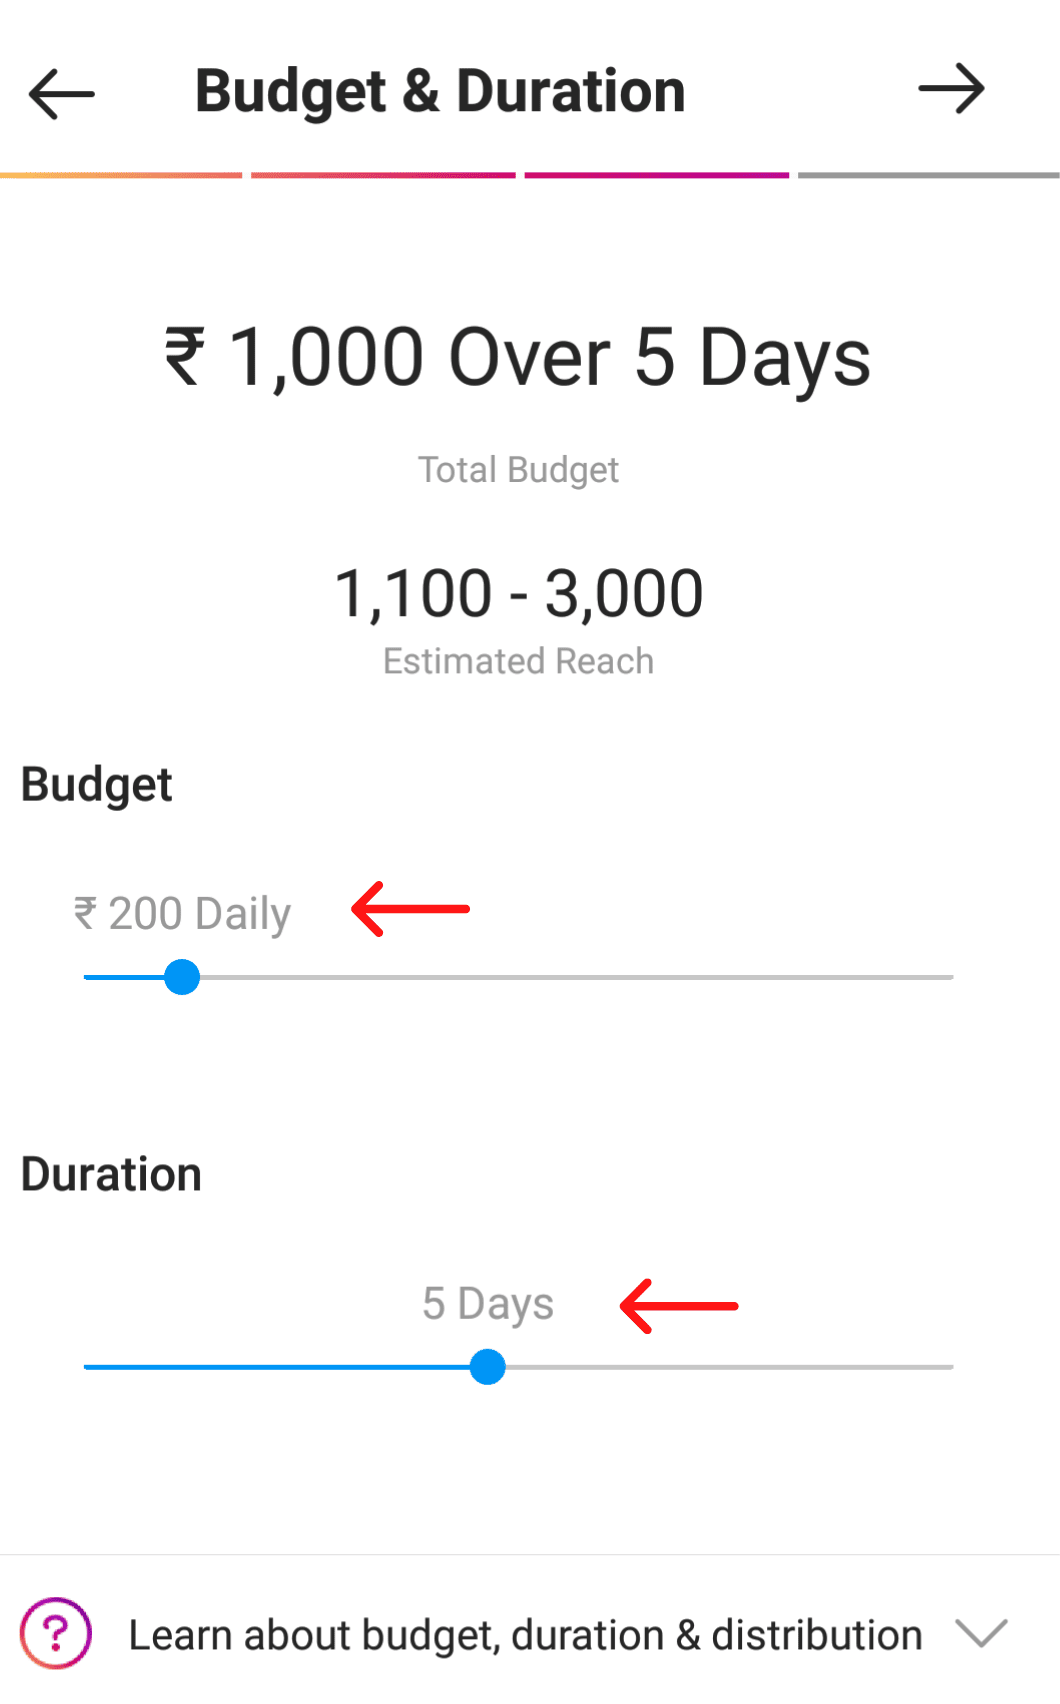 Select Budget and Duration